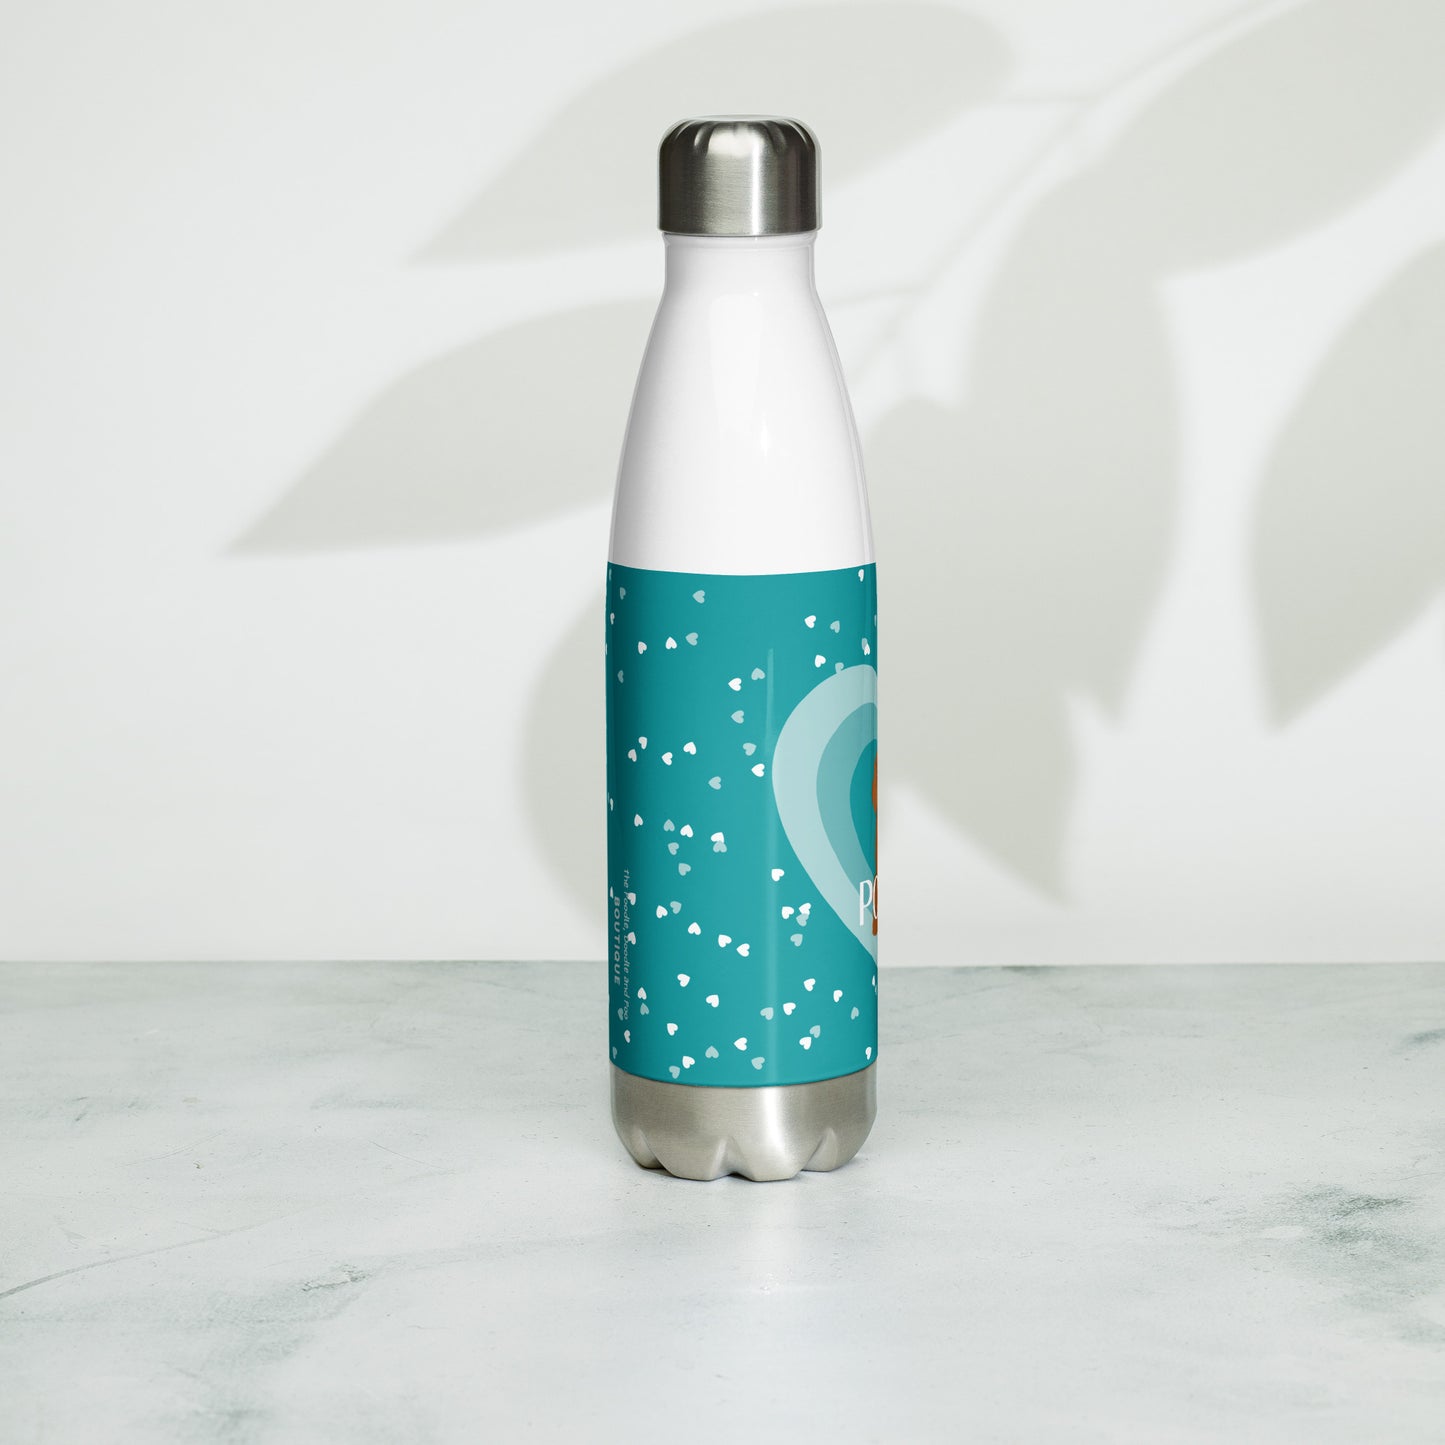 "Love" Stainless steel water bottle in teal - red Cockapoo